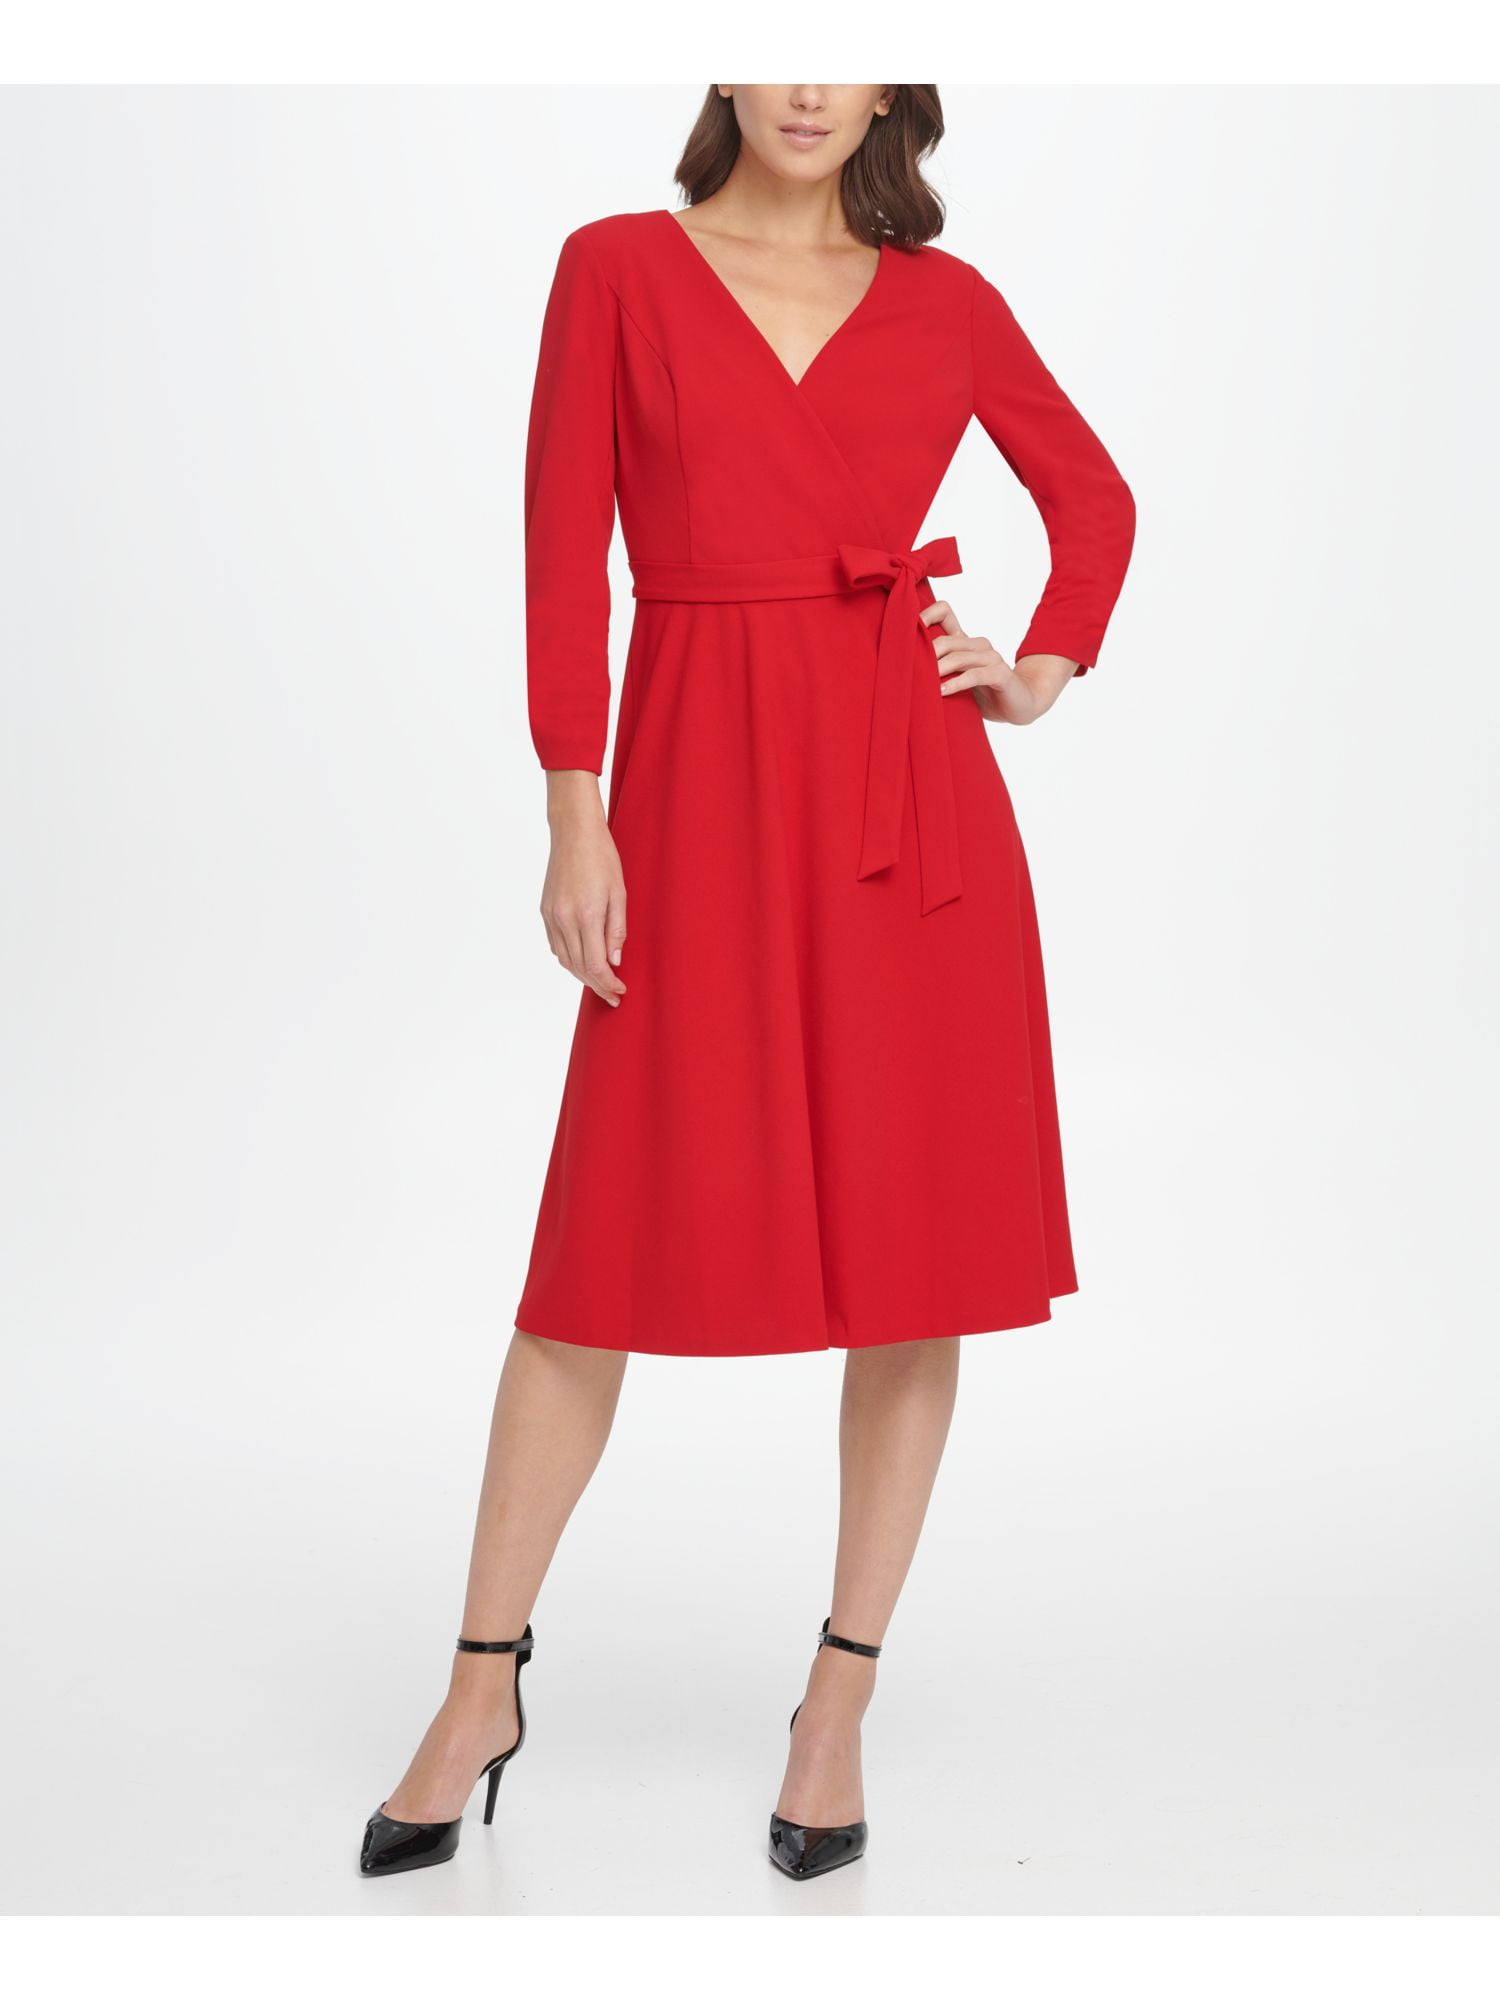 DKNY Womens Red Belted Cuffed V Neck ...